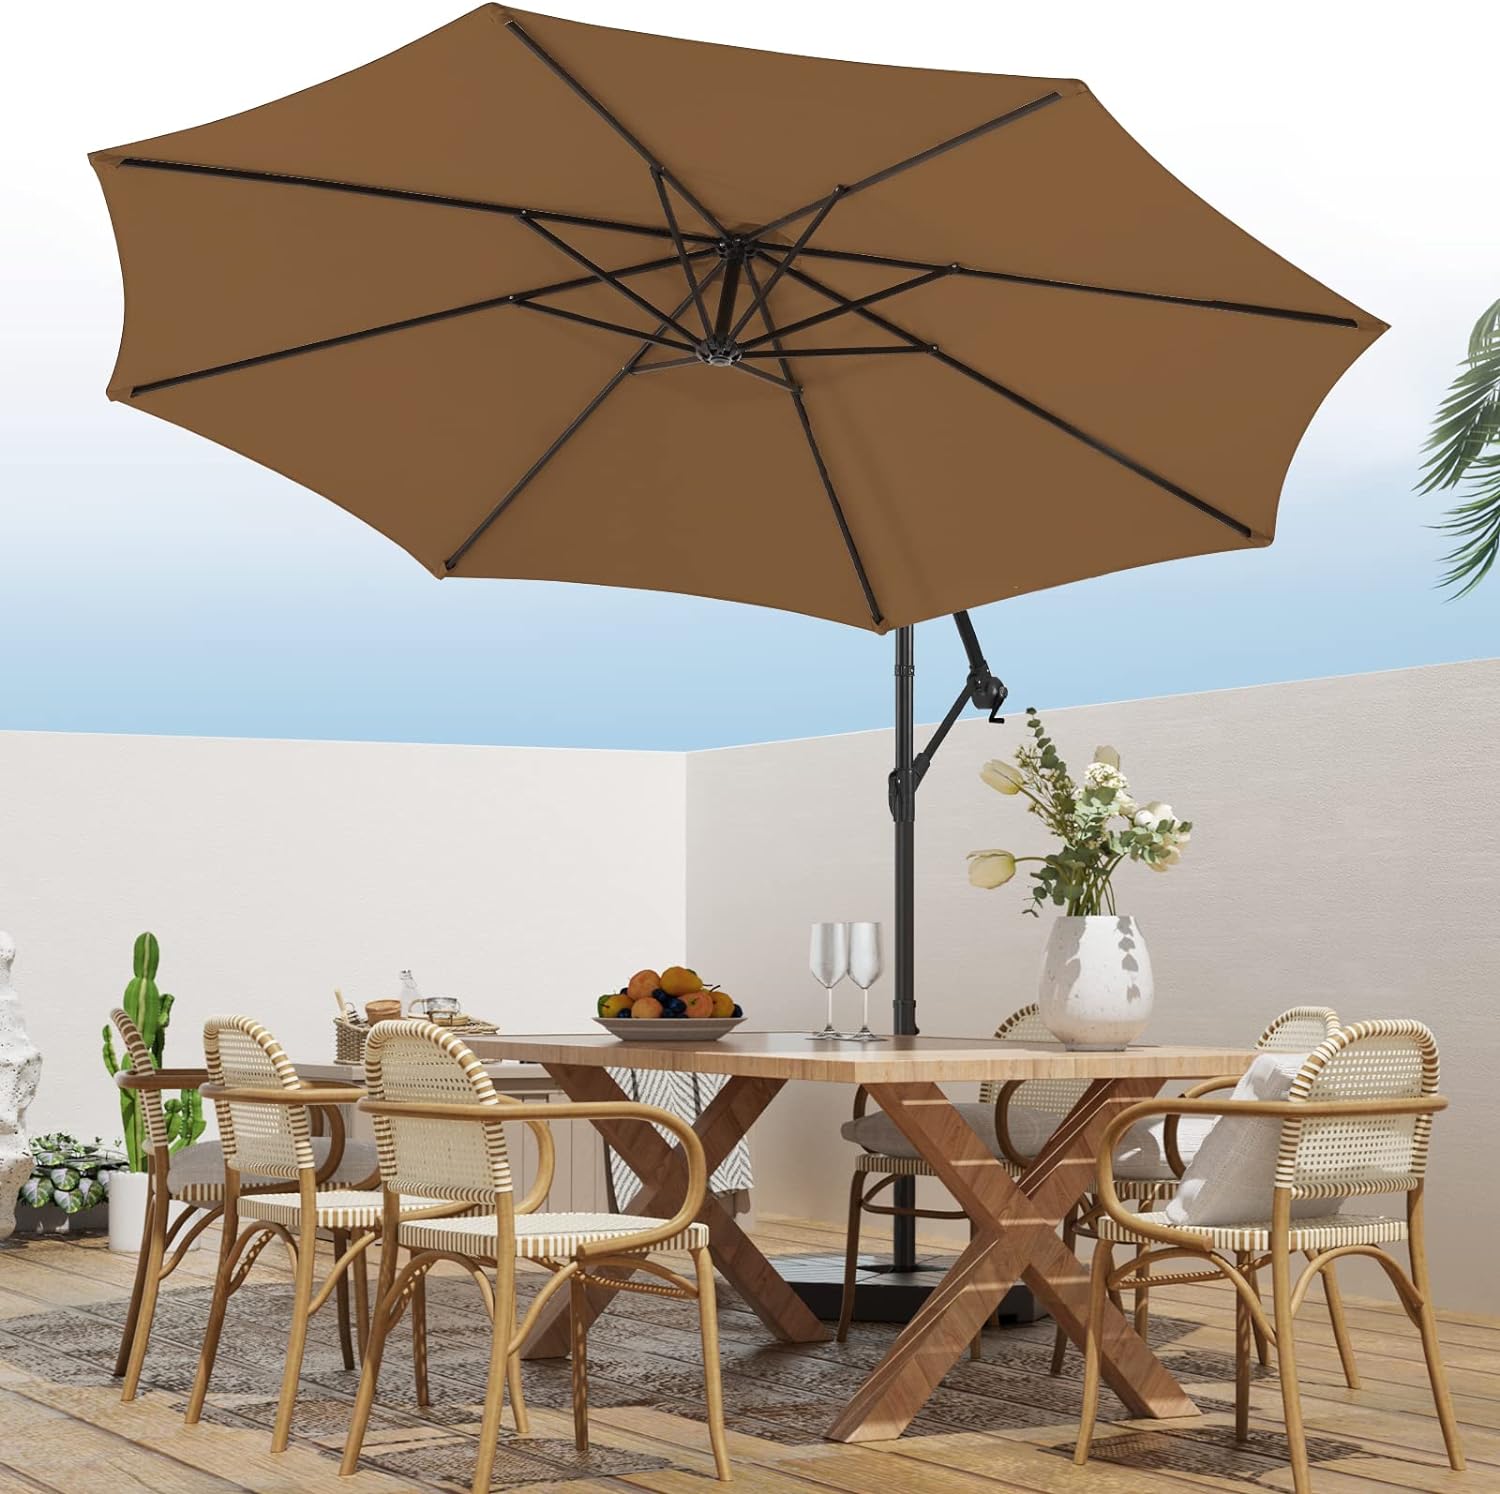 wikiwiki H Series Patio Offset Hanging Umbrella 10 FT Cantilever Outdoor Umbrellas w/Infinite Tilt, Fade Resistant Waterproof Solution-Dyed Canopy & Cross Base, for Yard, Garden & Deck (Wood)